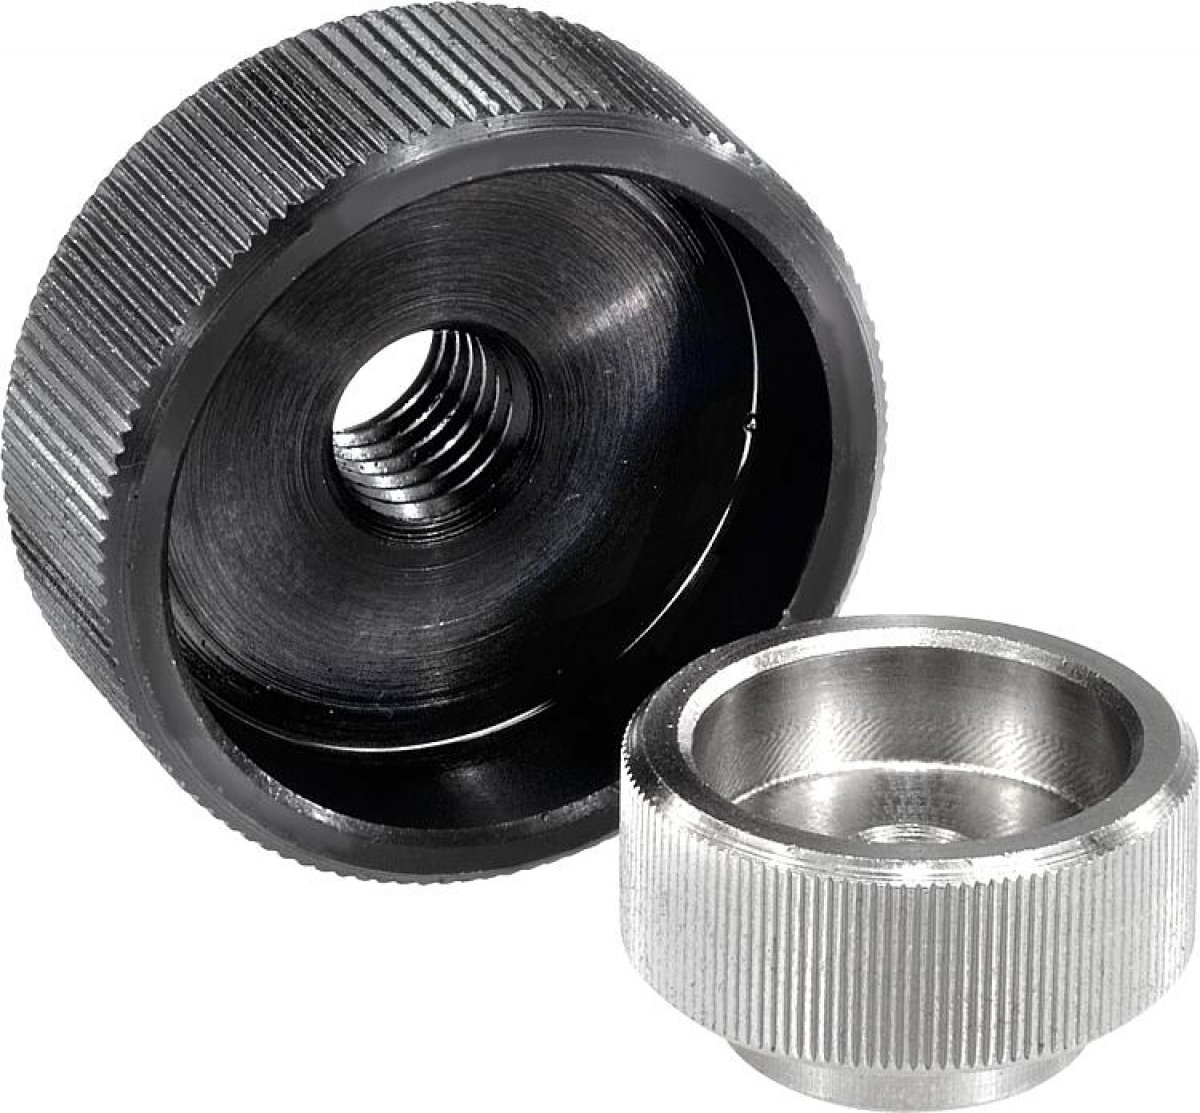 Knurled nuts steel and stainless steel, DIN 6303